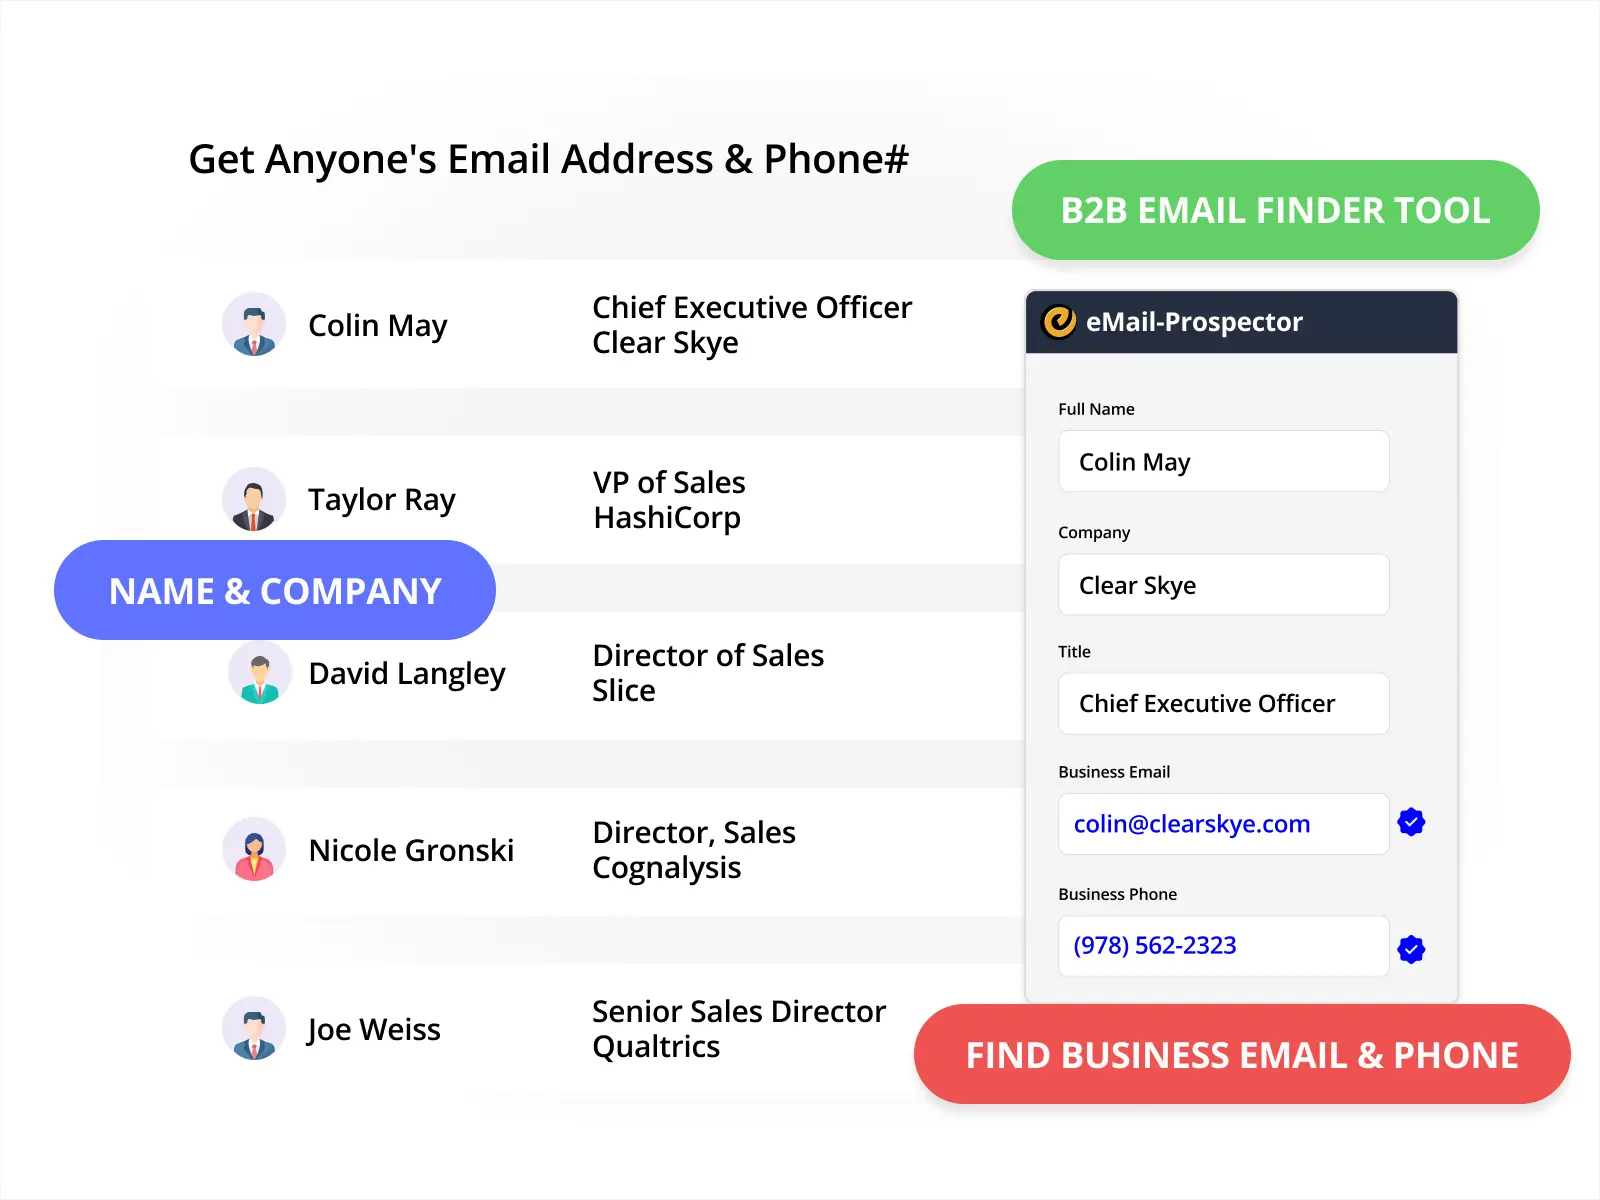 Get Anyone's Email Address & Phone# within Seconds